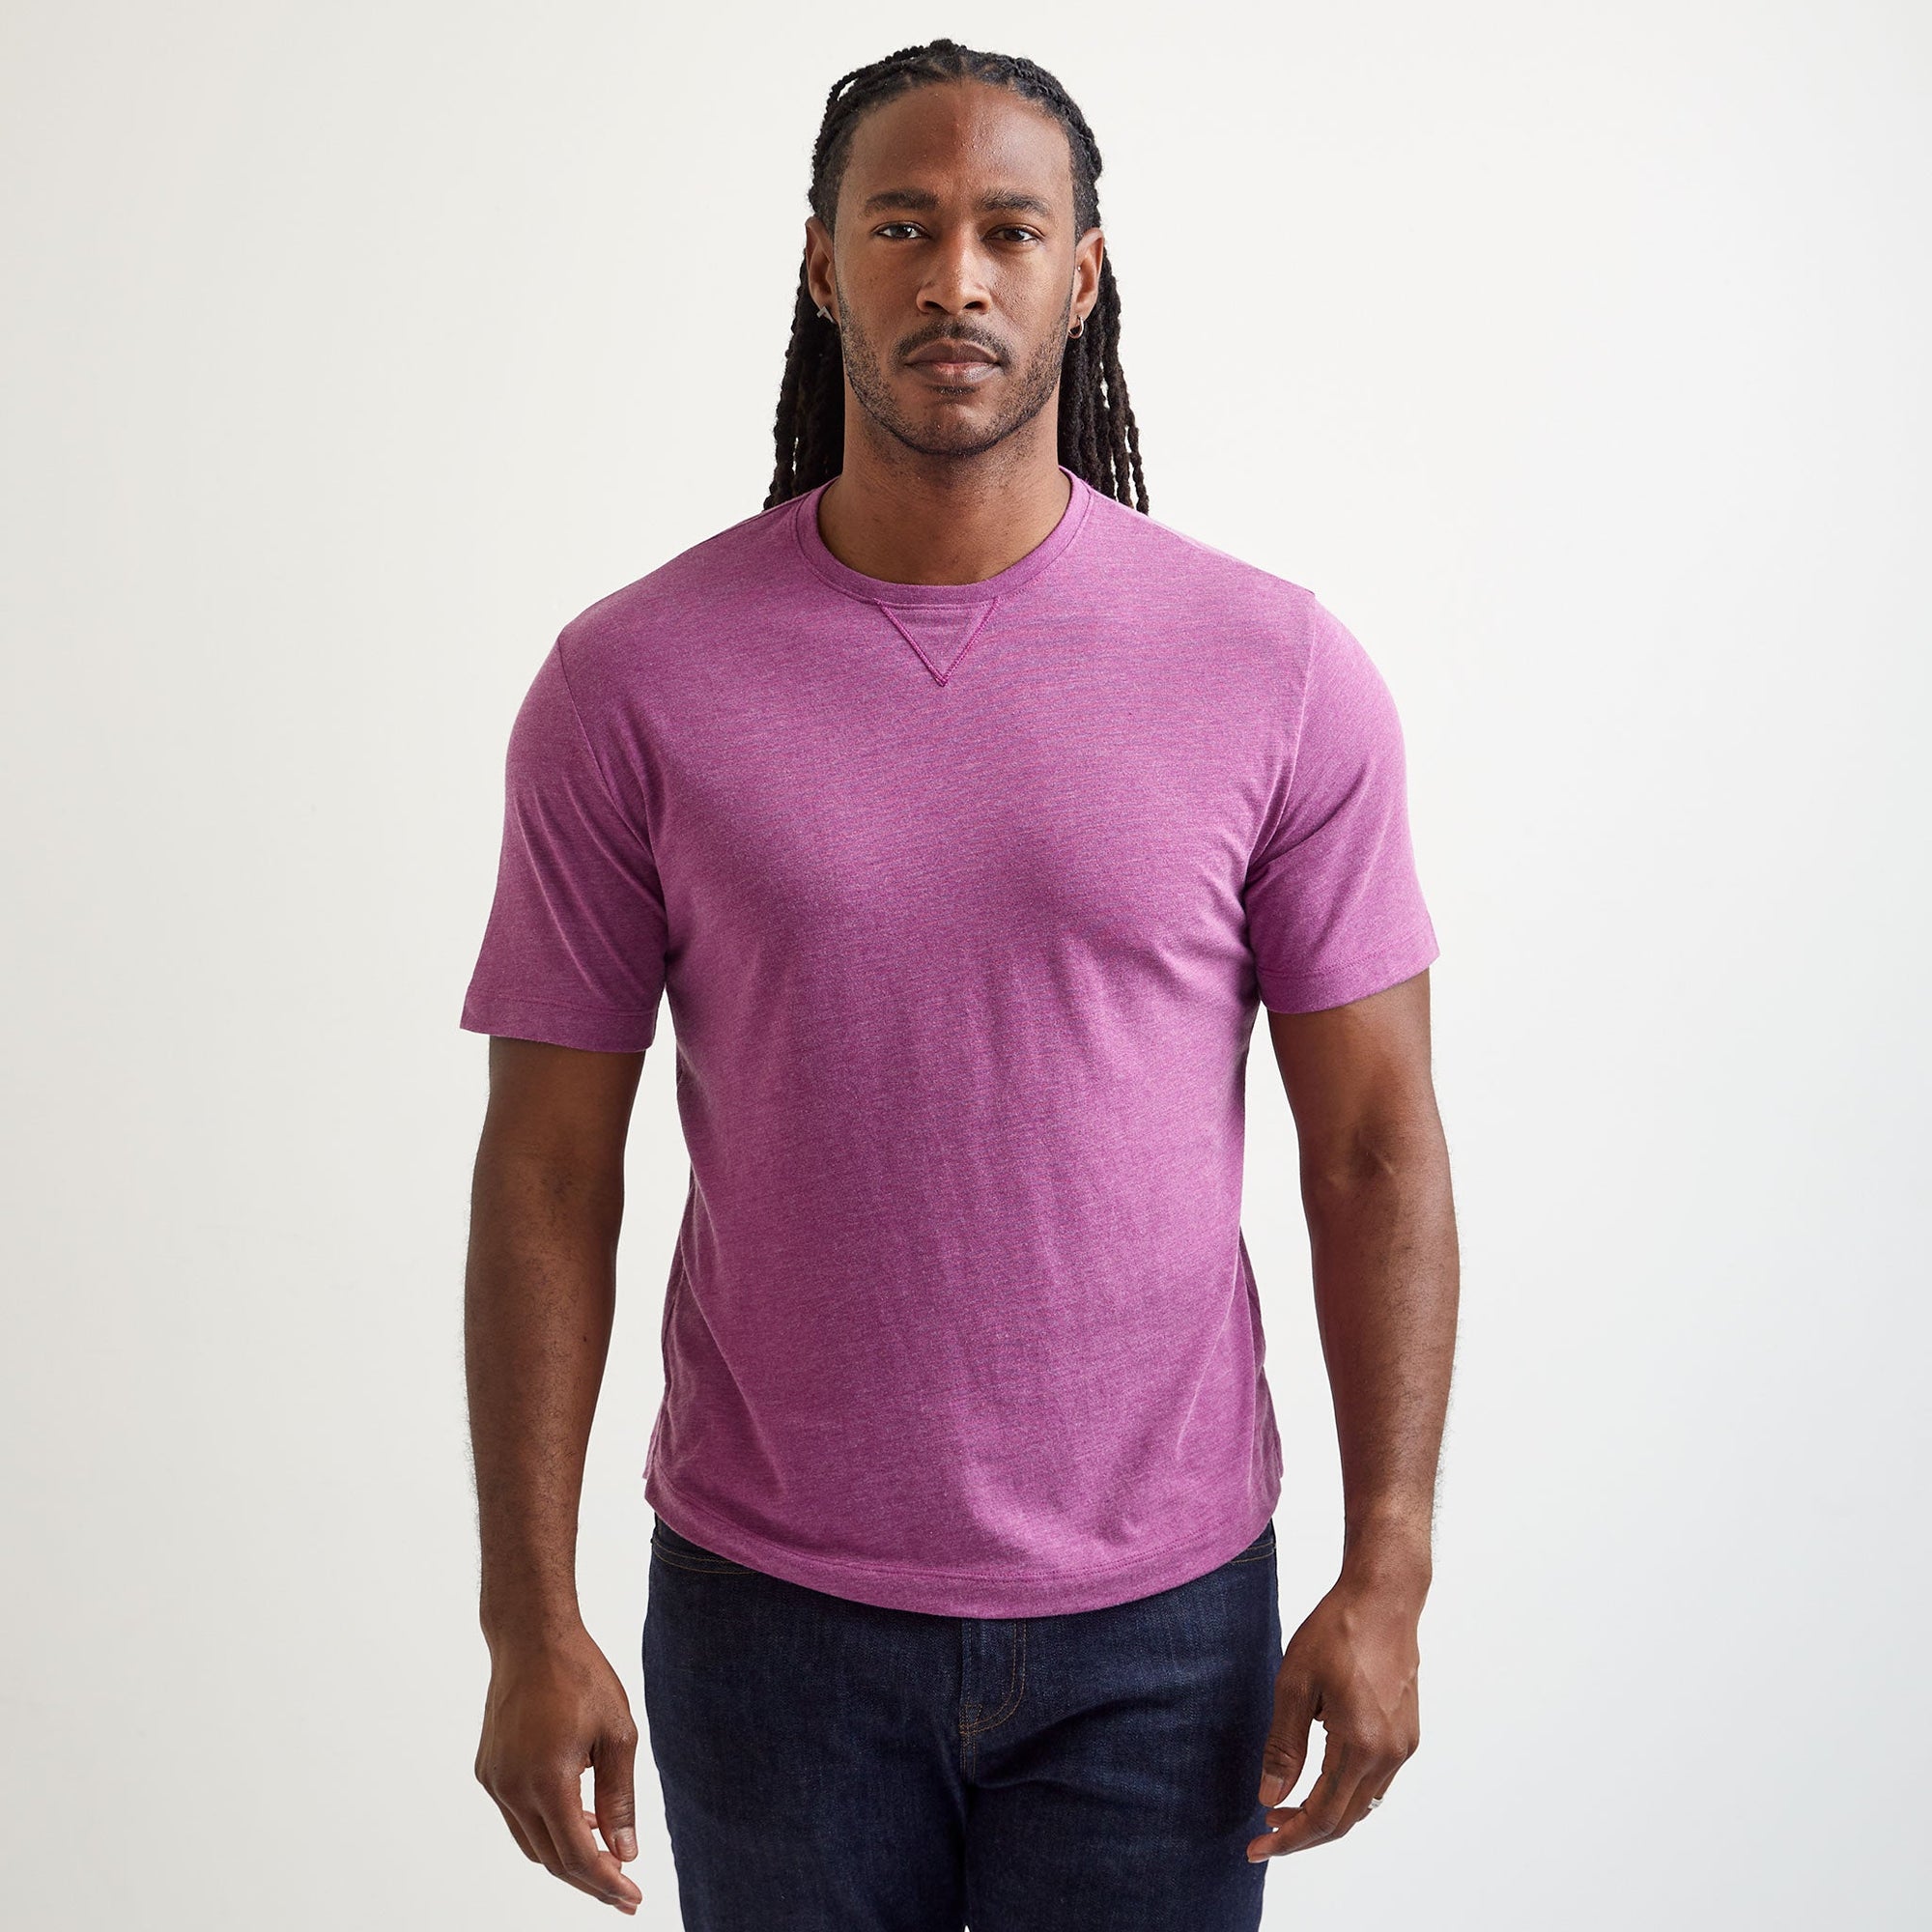 Westwood Village V-Inset Crew Neck T-Shirt in Purple Mix by Left Coast Tee